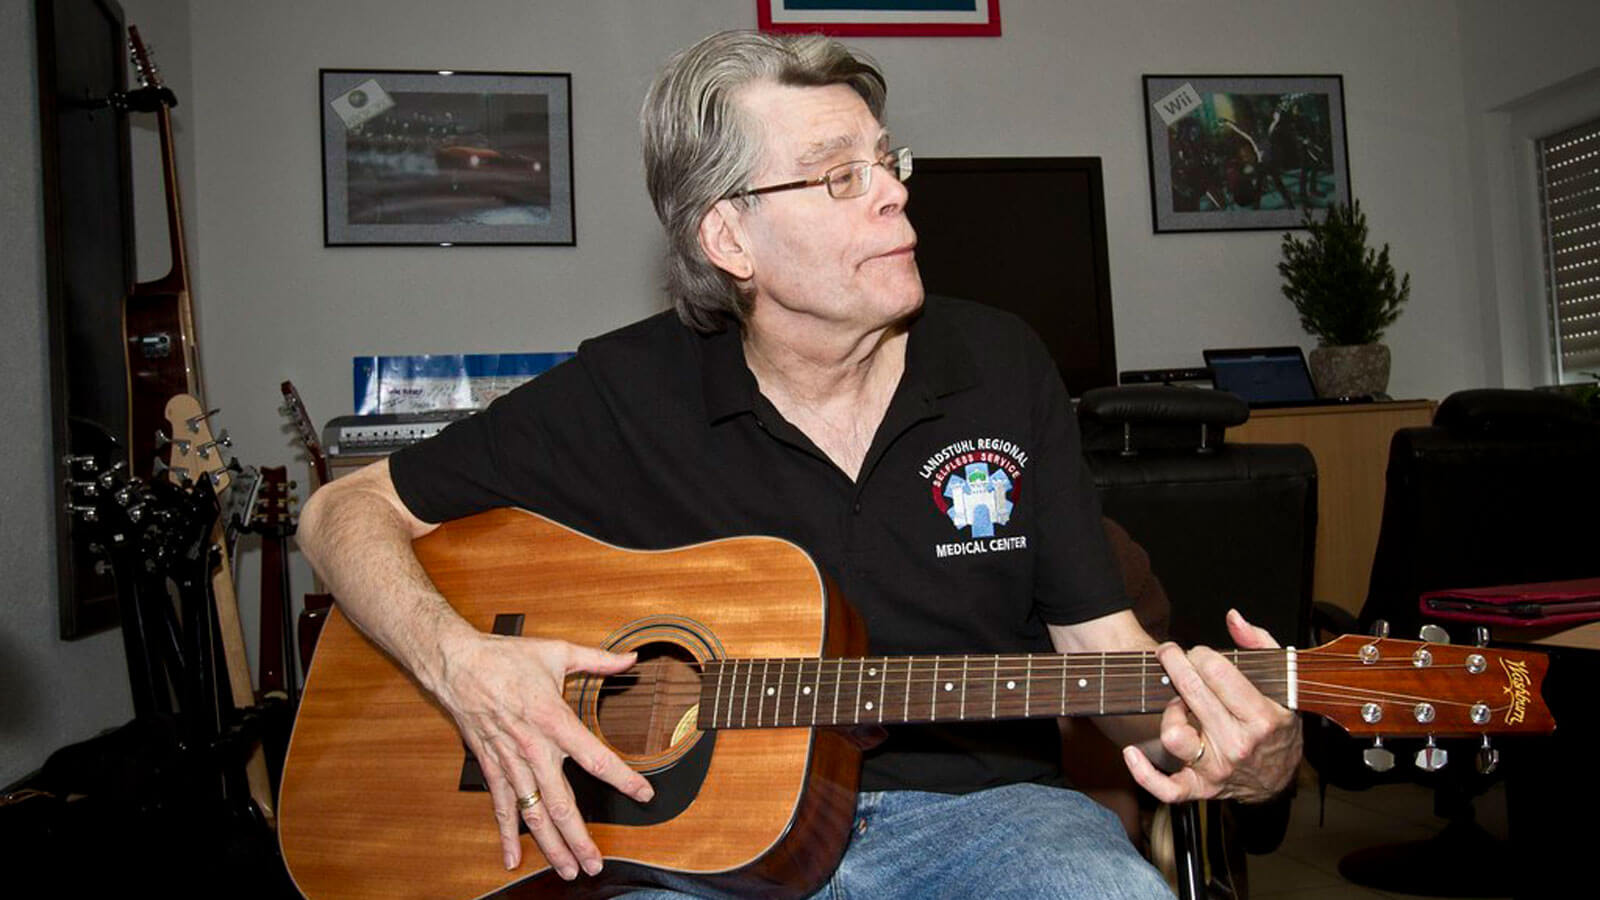 Metal and rock albums inspired by famous writer Stephen King